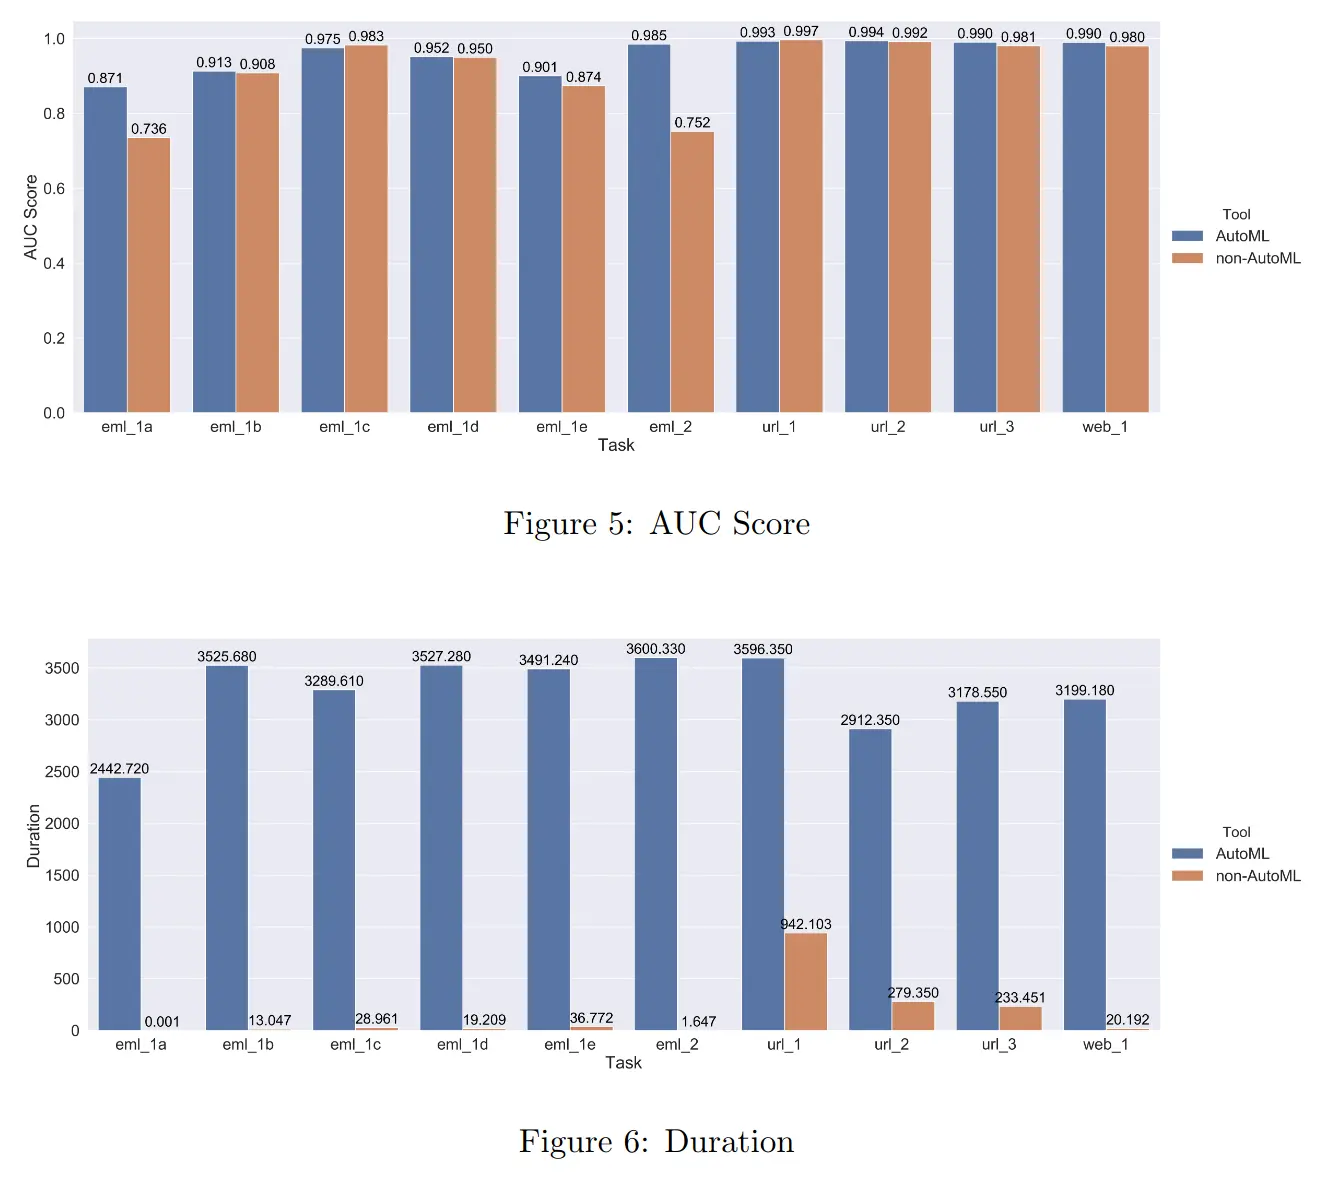 Comparisons of the AUC score and training duration of the best model built using AutoML and non-AutoML frameworks